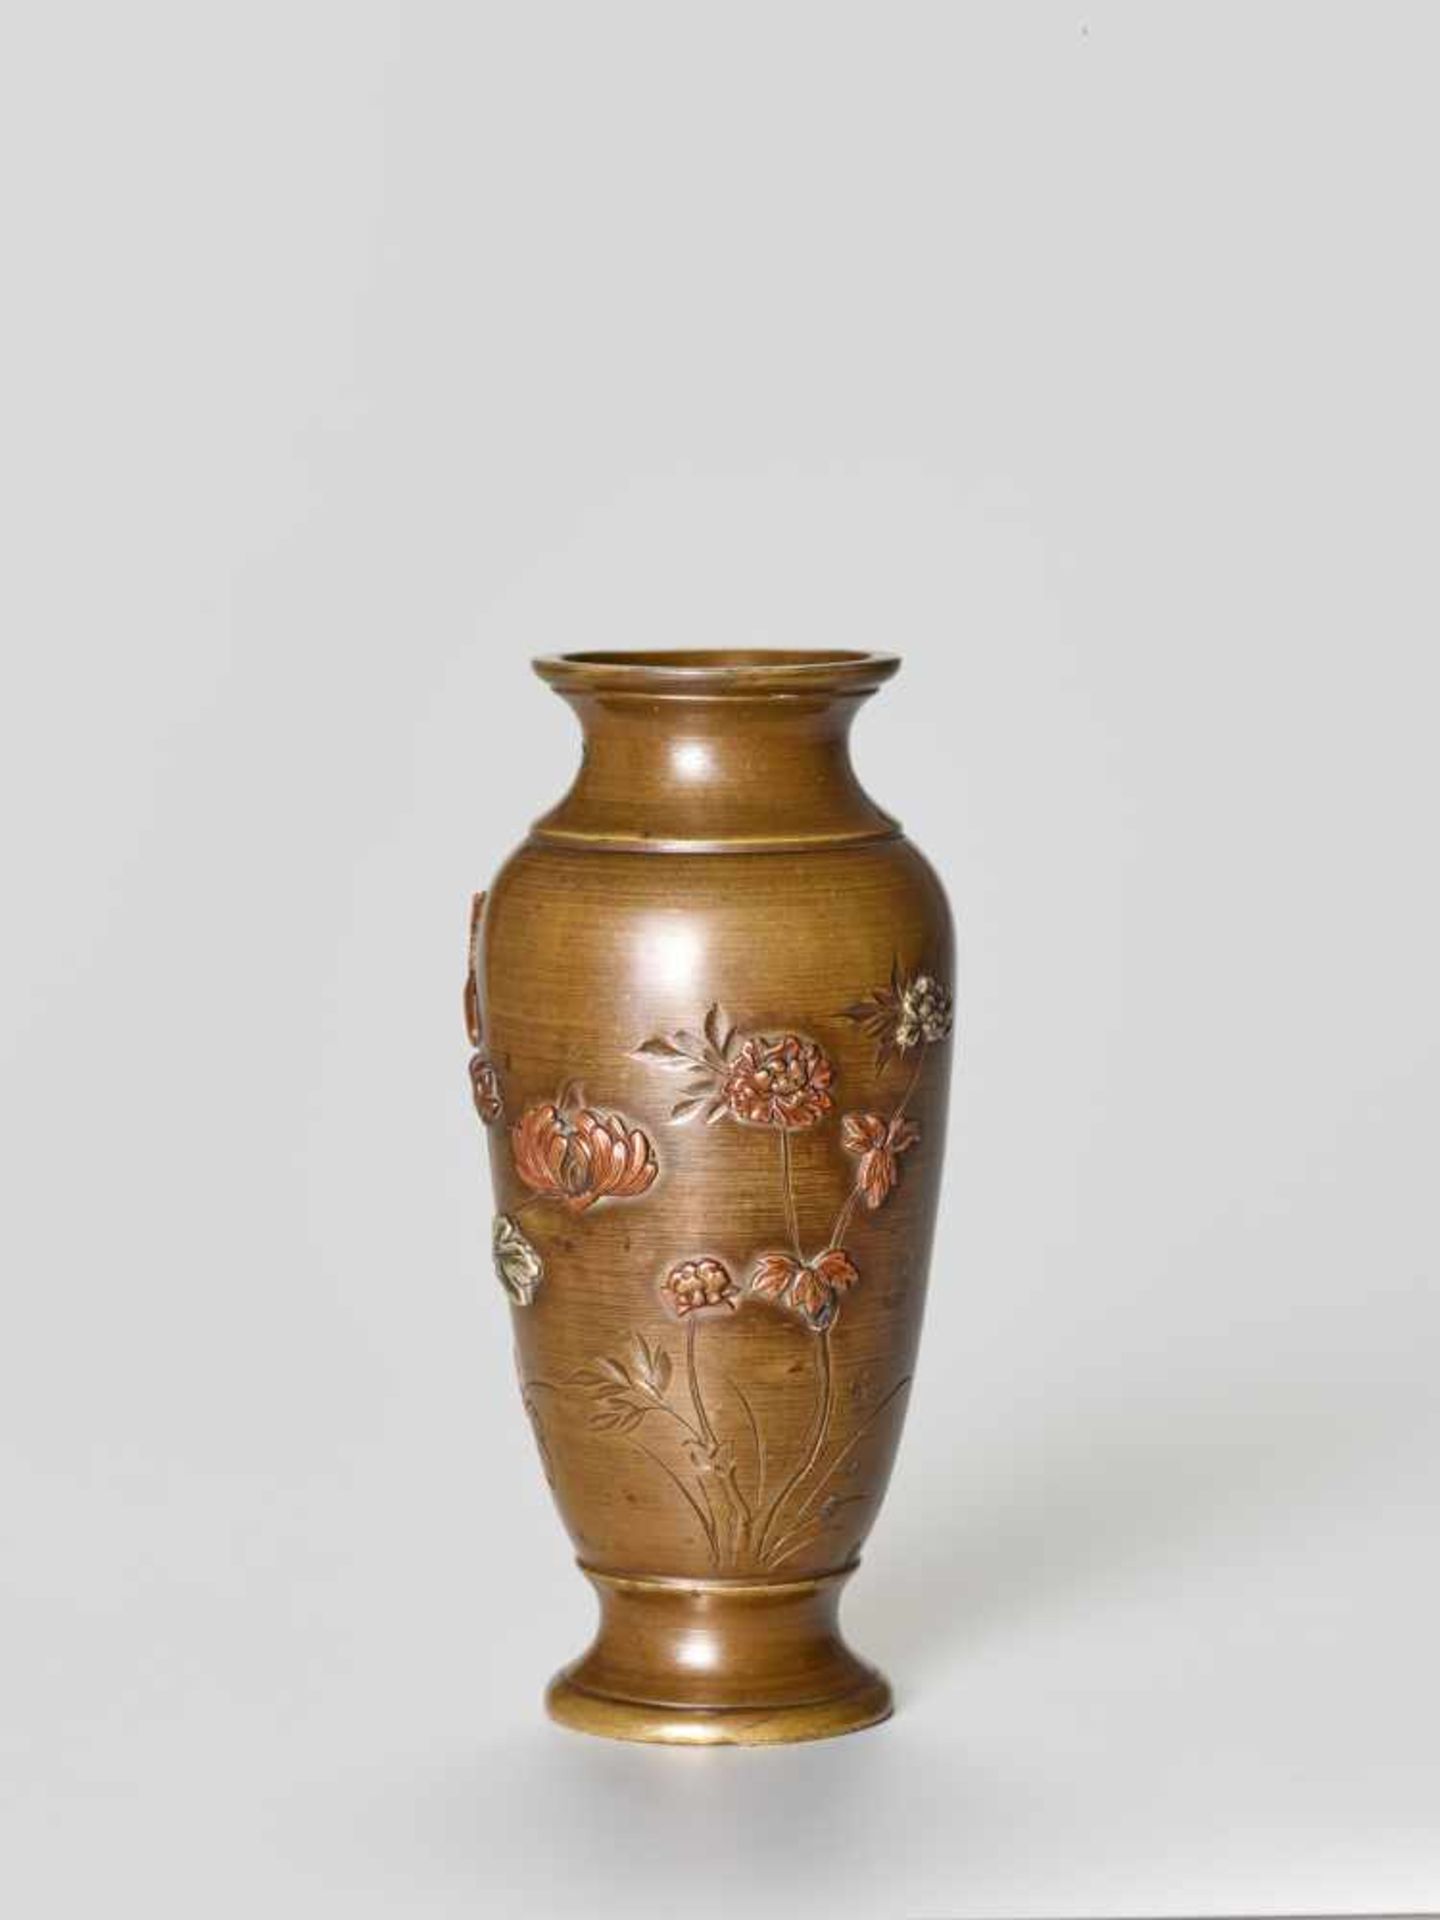 A SMALL MIXED METAL VASE WITH BIRDS AND FLOWERSSentoku with shibuichi and silver inlayJapan, late - Image 4 of 8